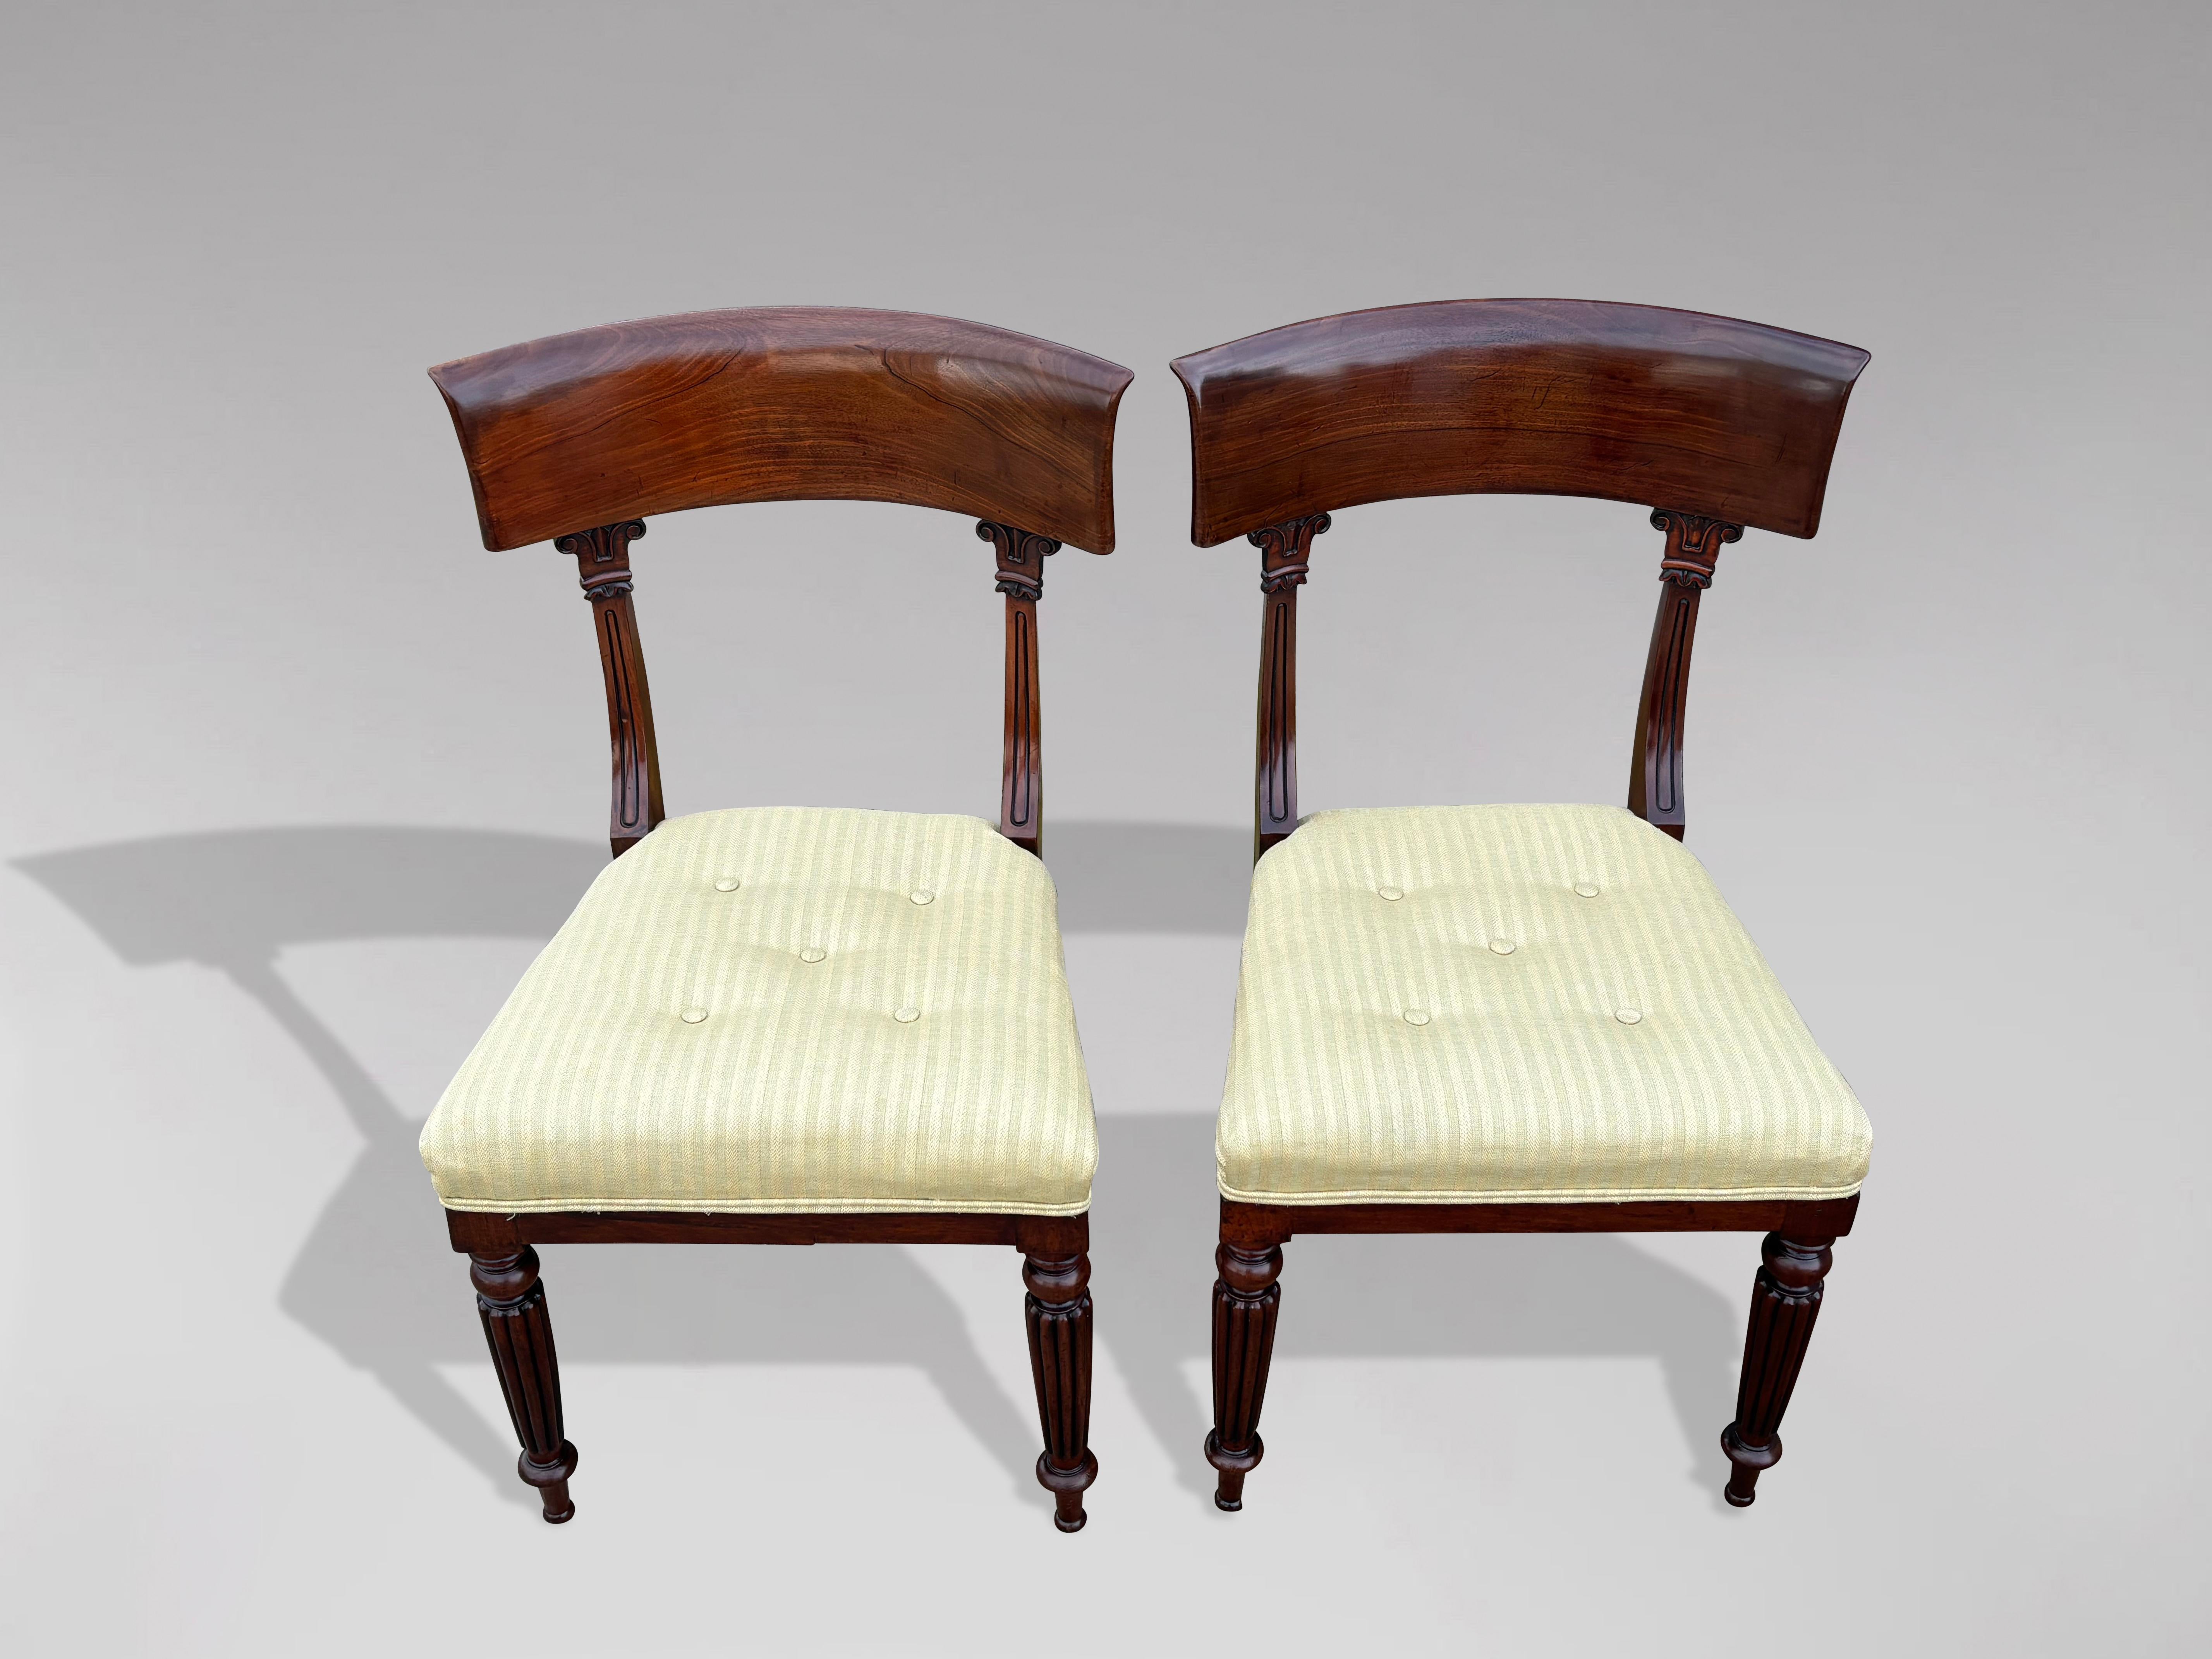 Polished Pair of 19th Century William IV Period Mahogany Side Chairs For Sale